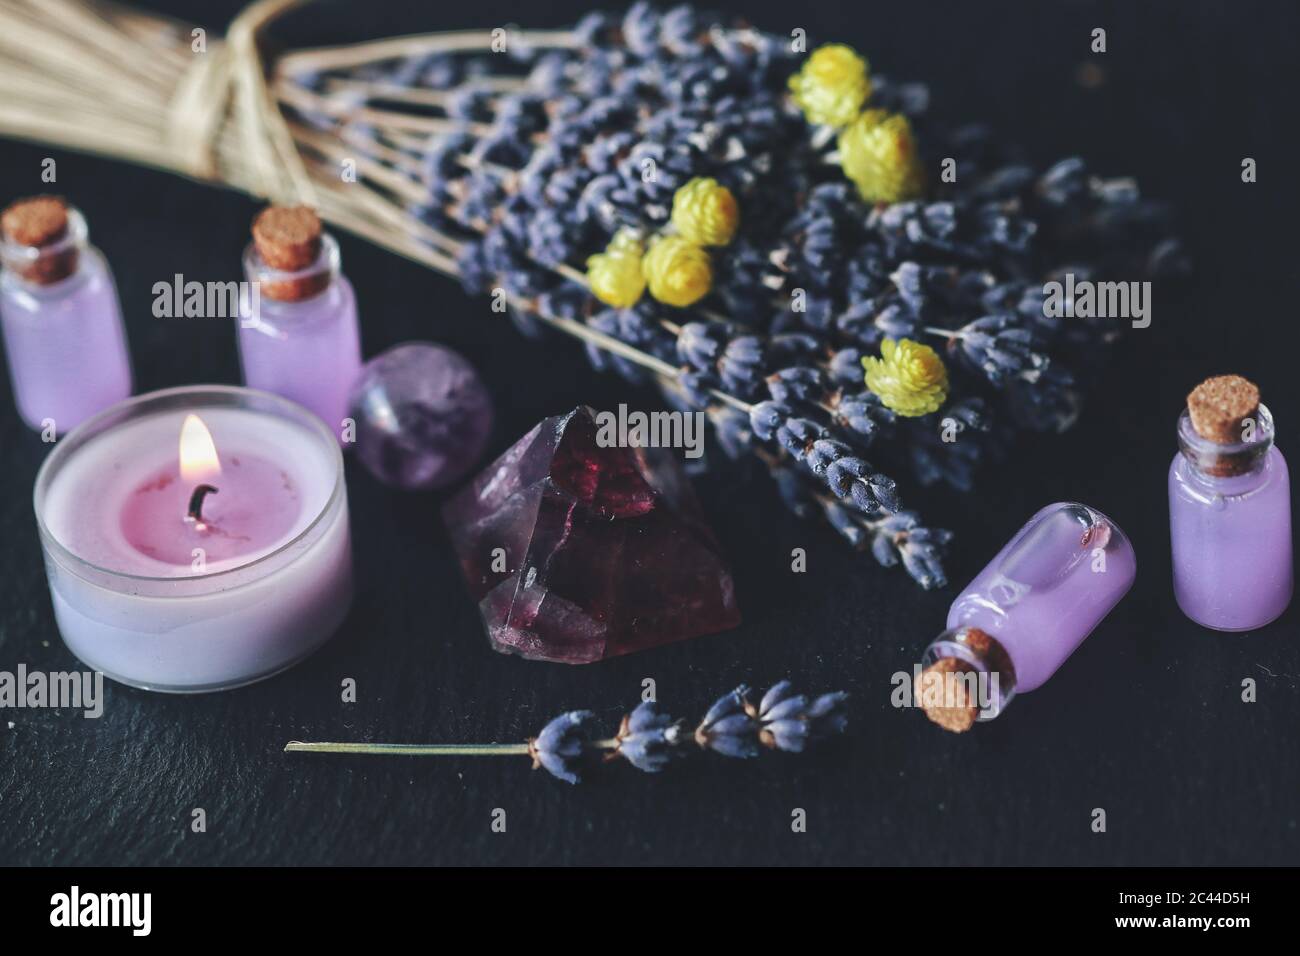 Herbal magick in wicca and witchcraft using lavender infused water. Purple lit burning candle, amethyst pyramid crystal, dried lavender flowers Stock Photo